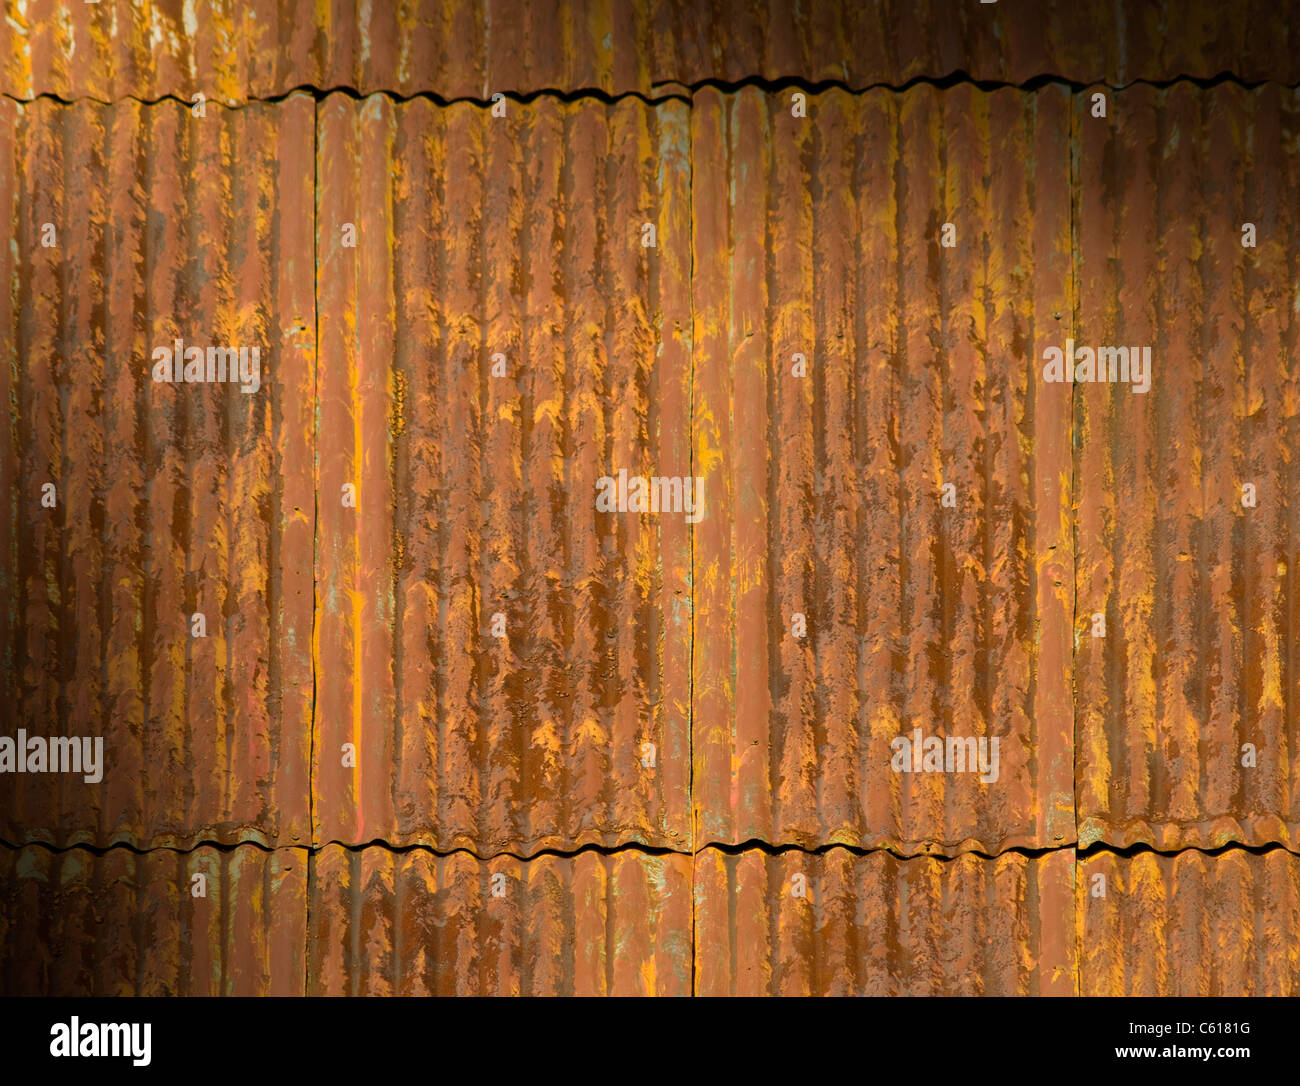 Corroded and rusty corrugated metal roof panels lit diagonally Stock Photo